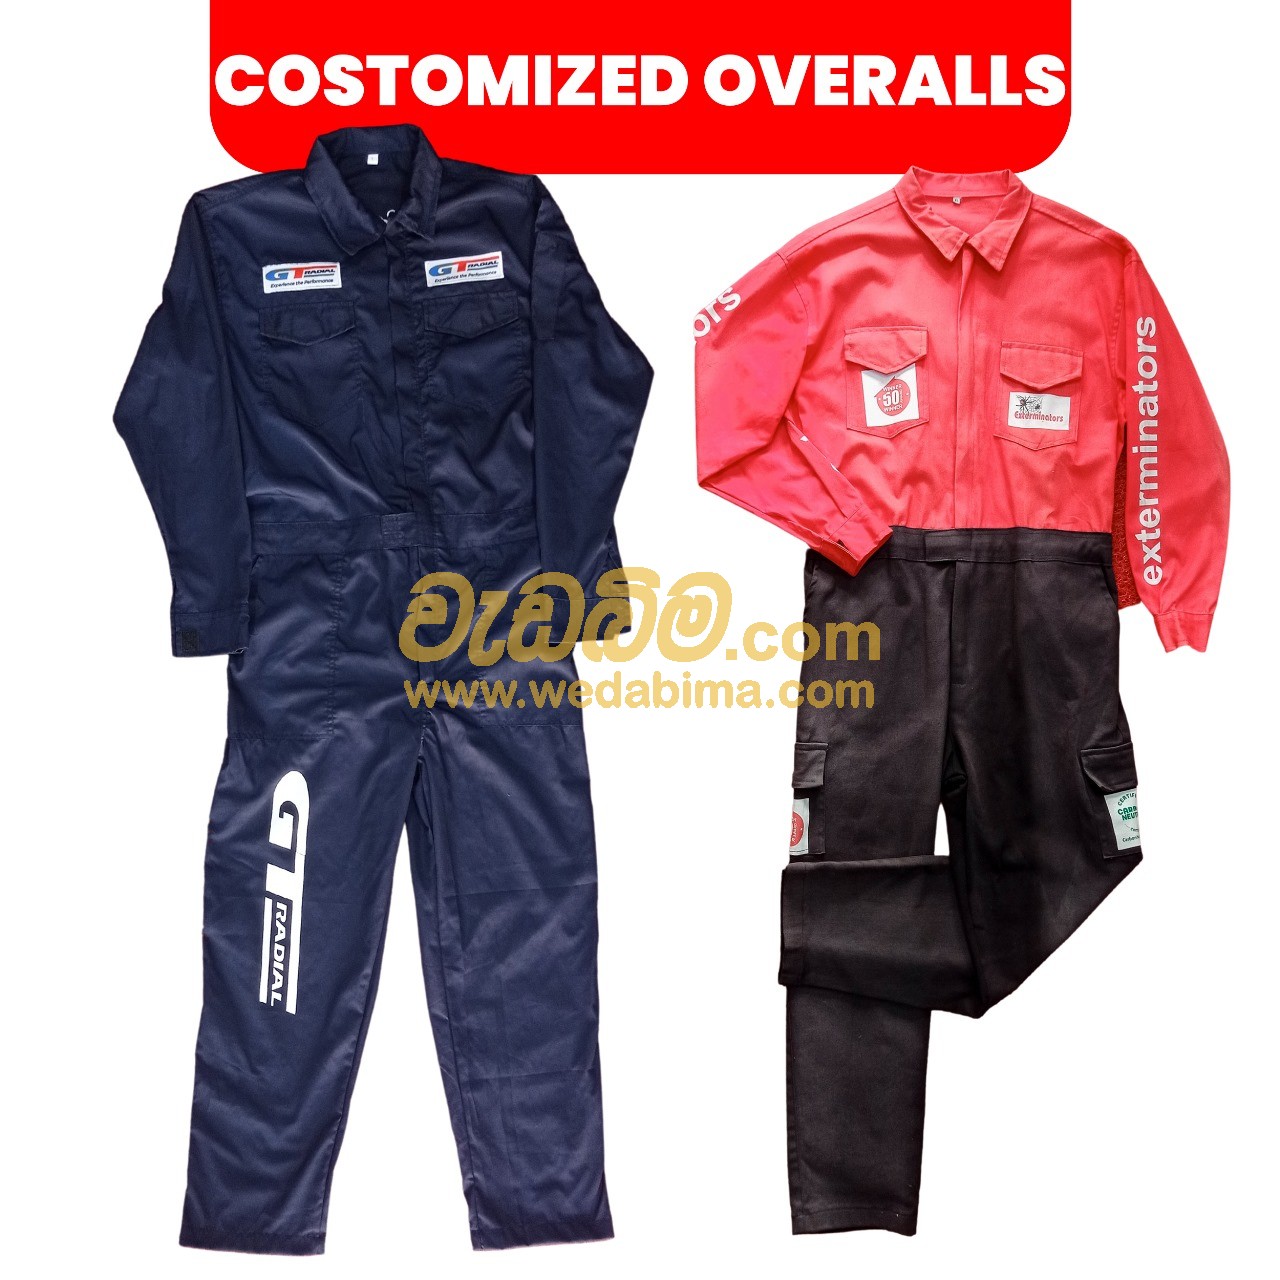 Cover image for Overall Kit - Small Medium Large